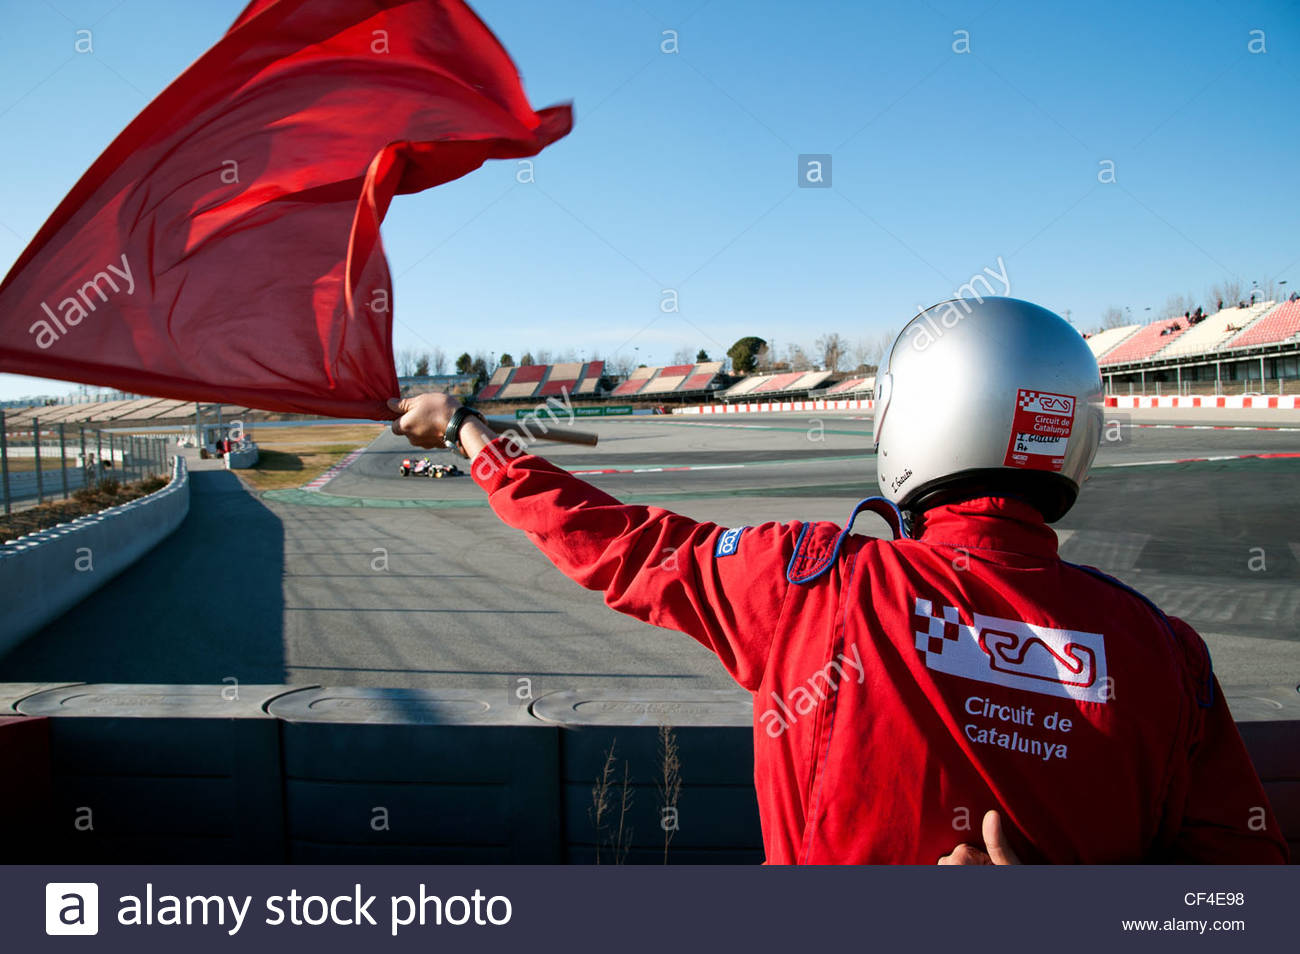 What is red flag in f1?